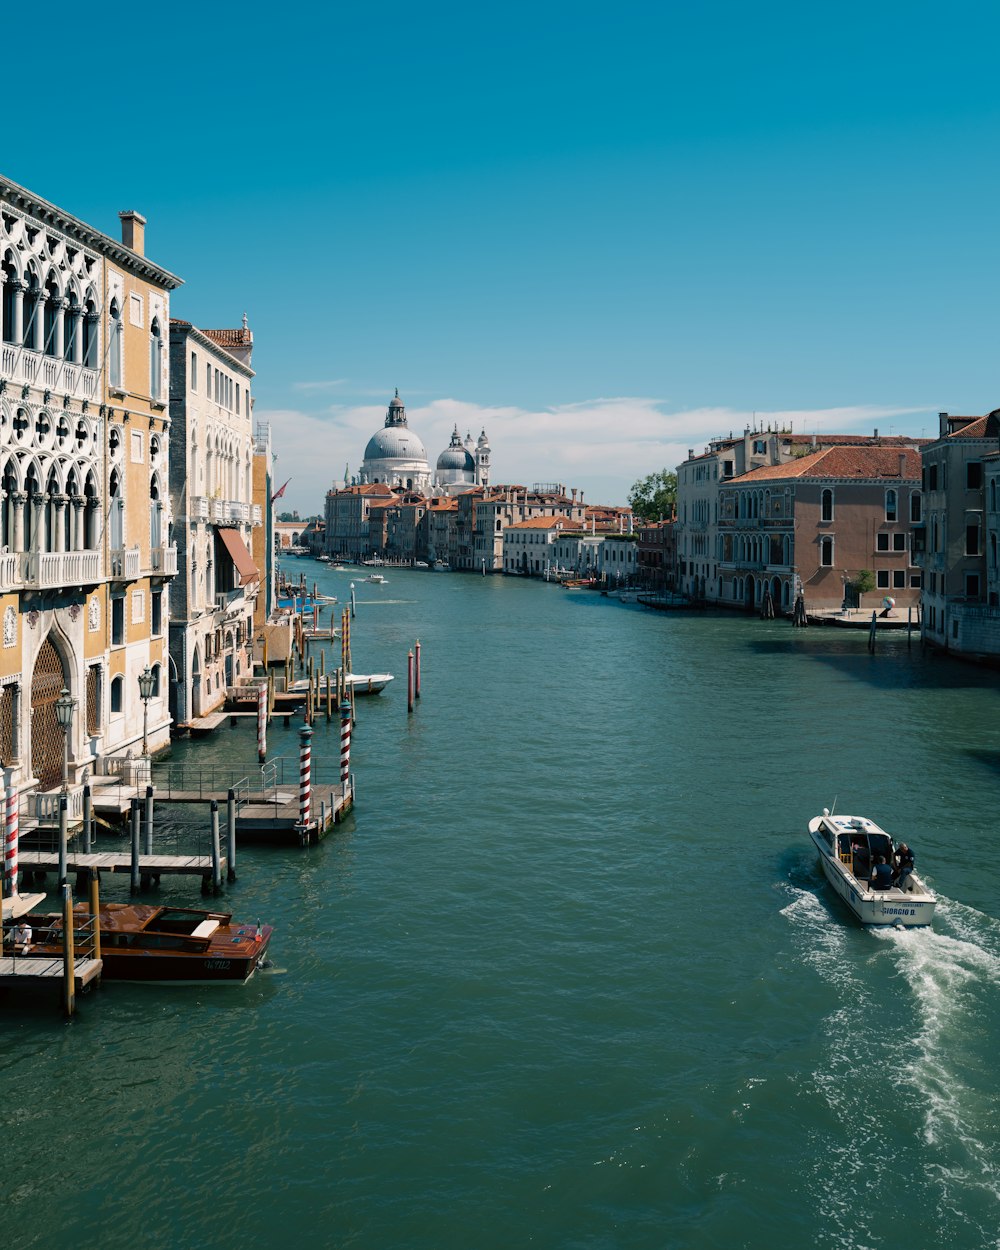 a river with boats in it and buildings along it with Grand Canal in the background